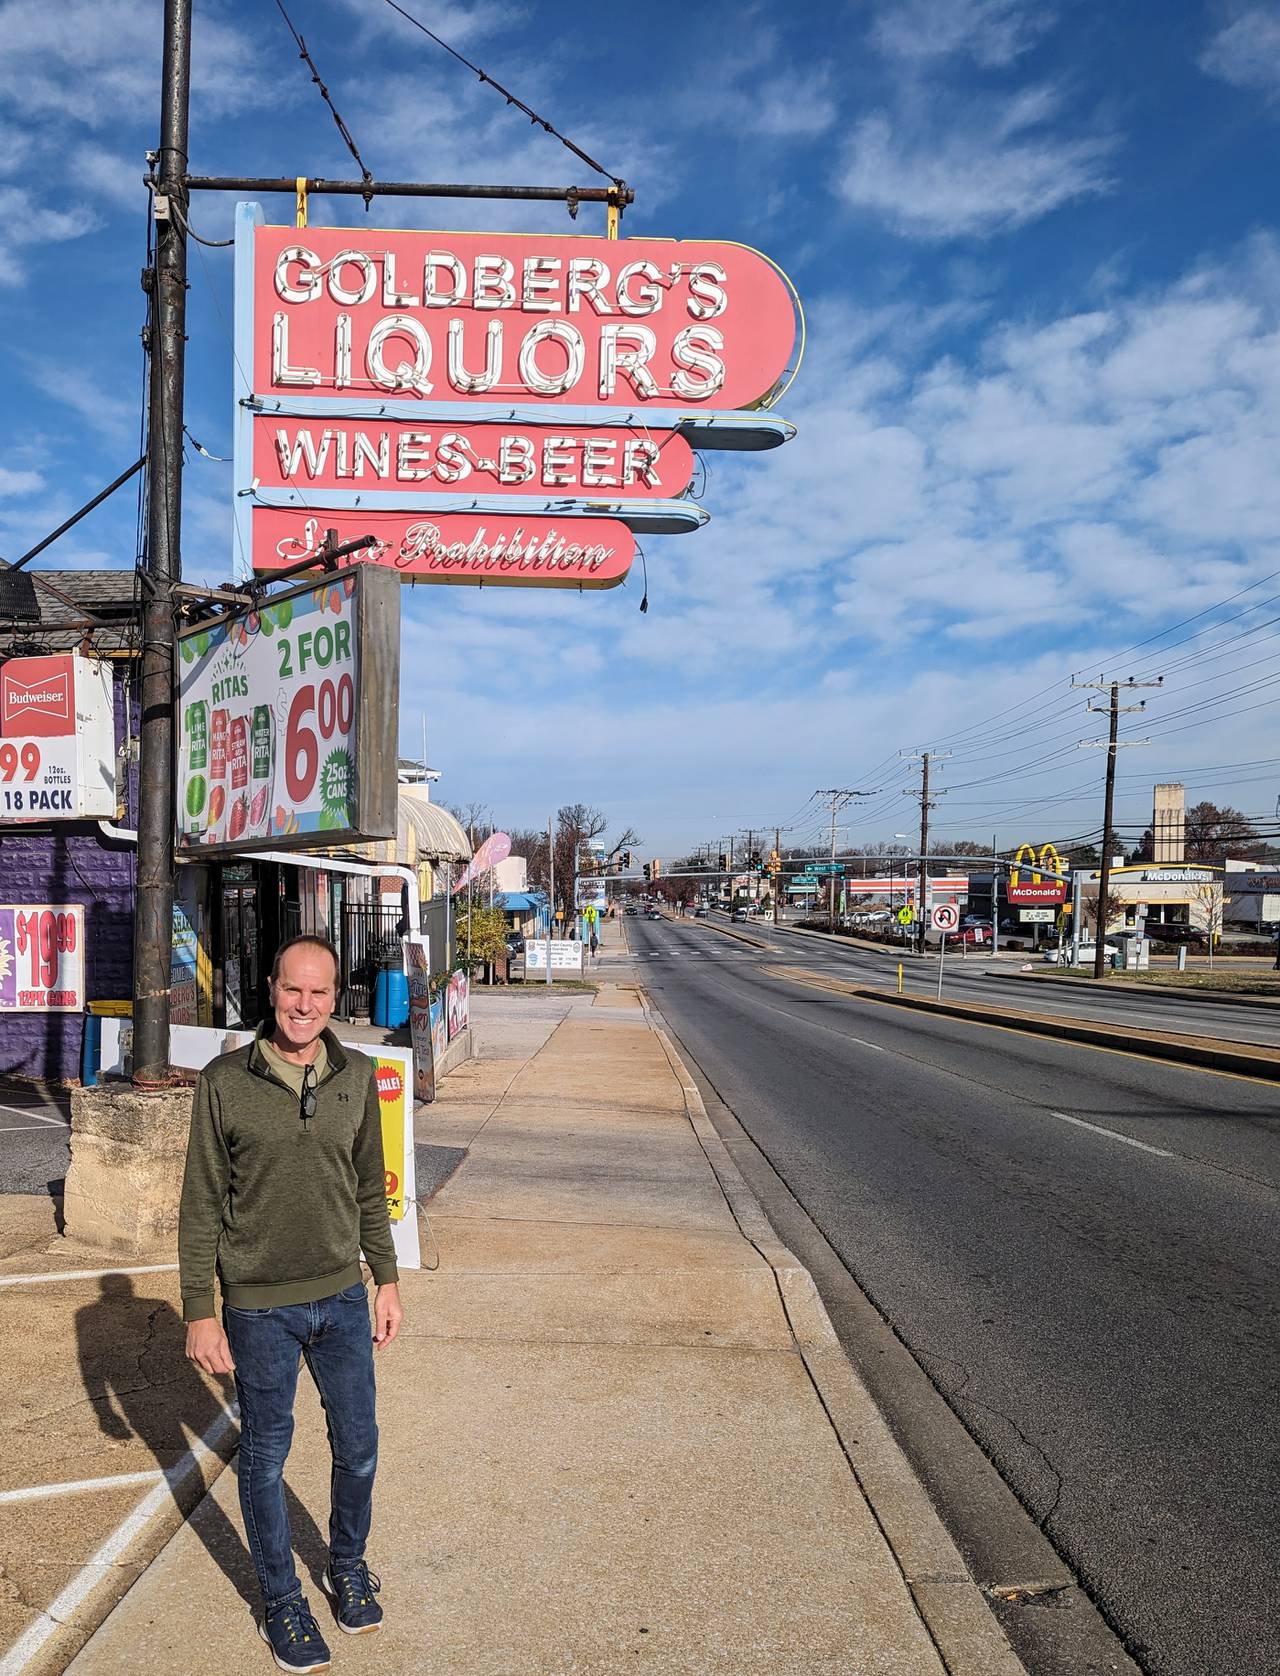 Although there is no official award, Goldberg's Liquors is generally considered the oldest liquor business in Anne Arundel County.